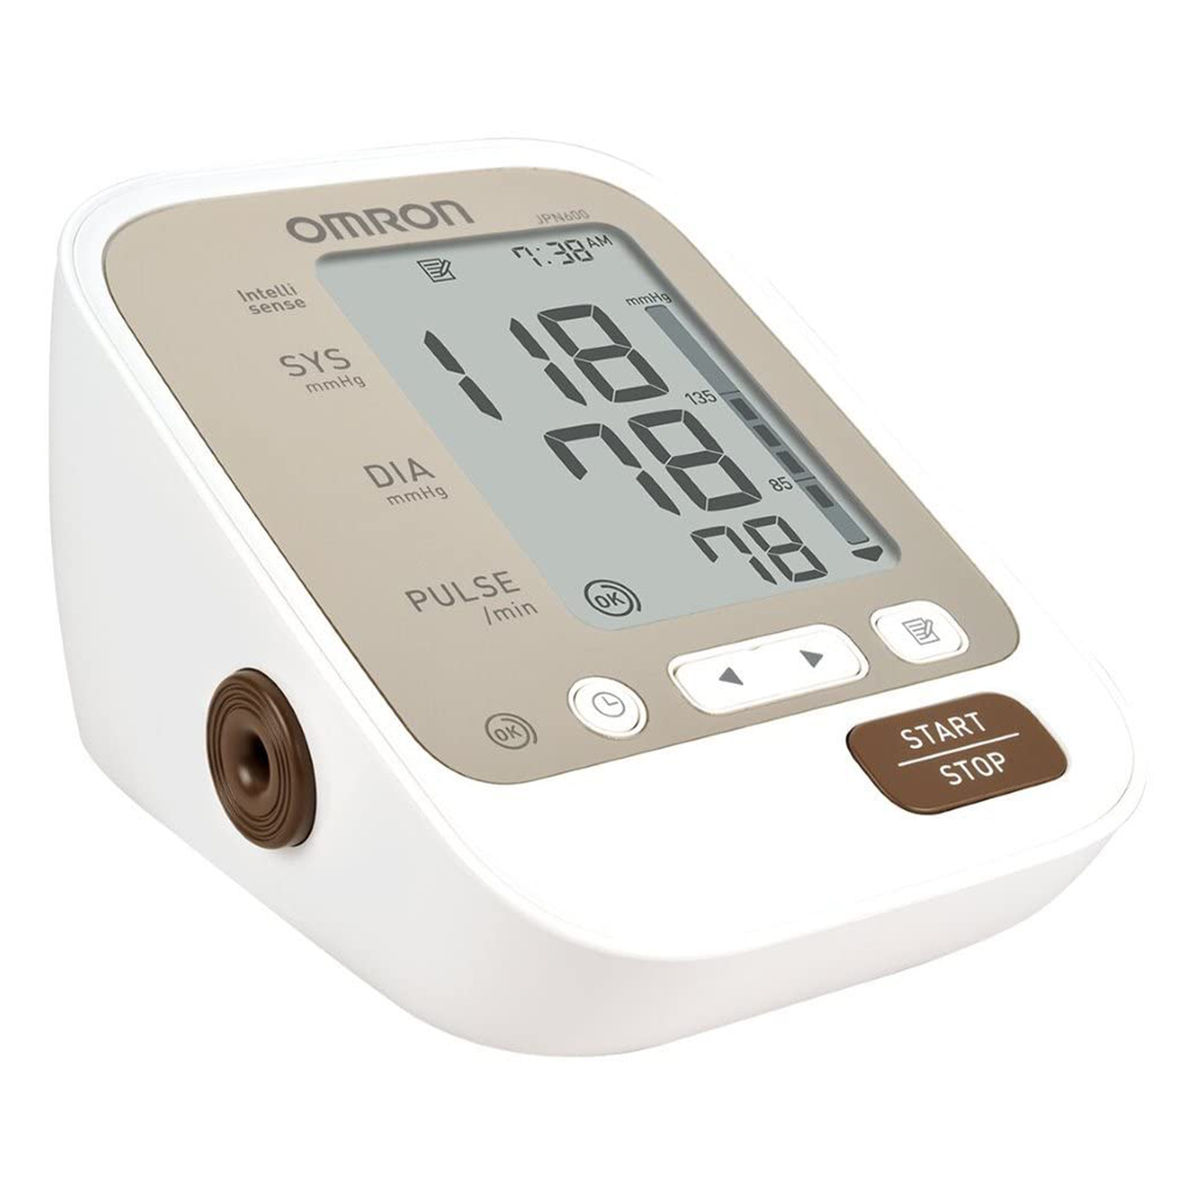 Buy Omron JPN 600 Automatic Blood Pressure Monitor, 1 Count Online